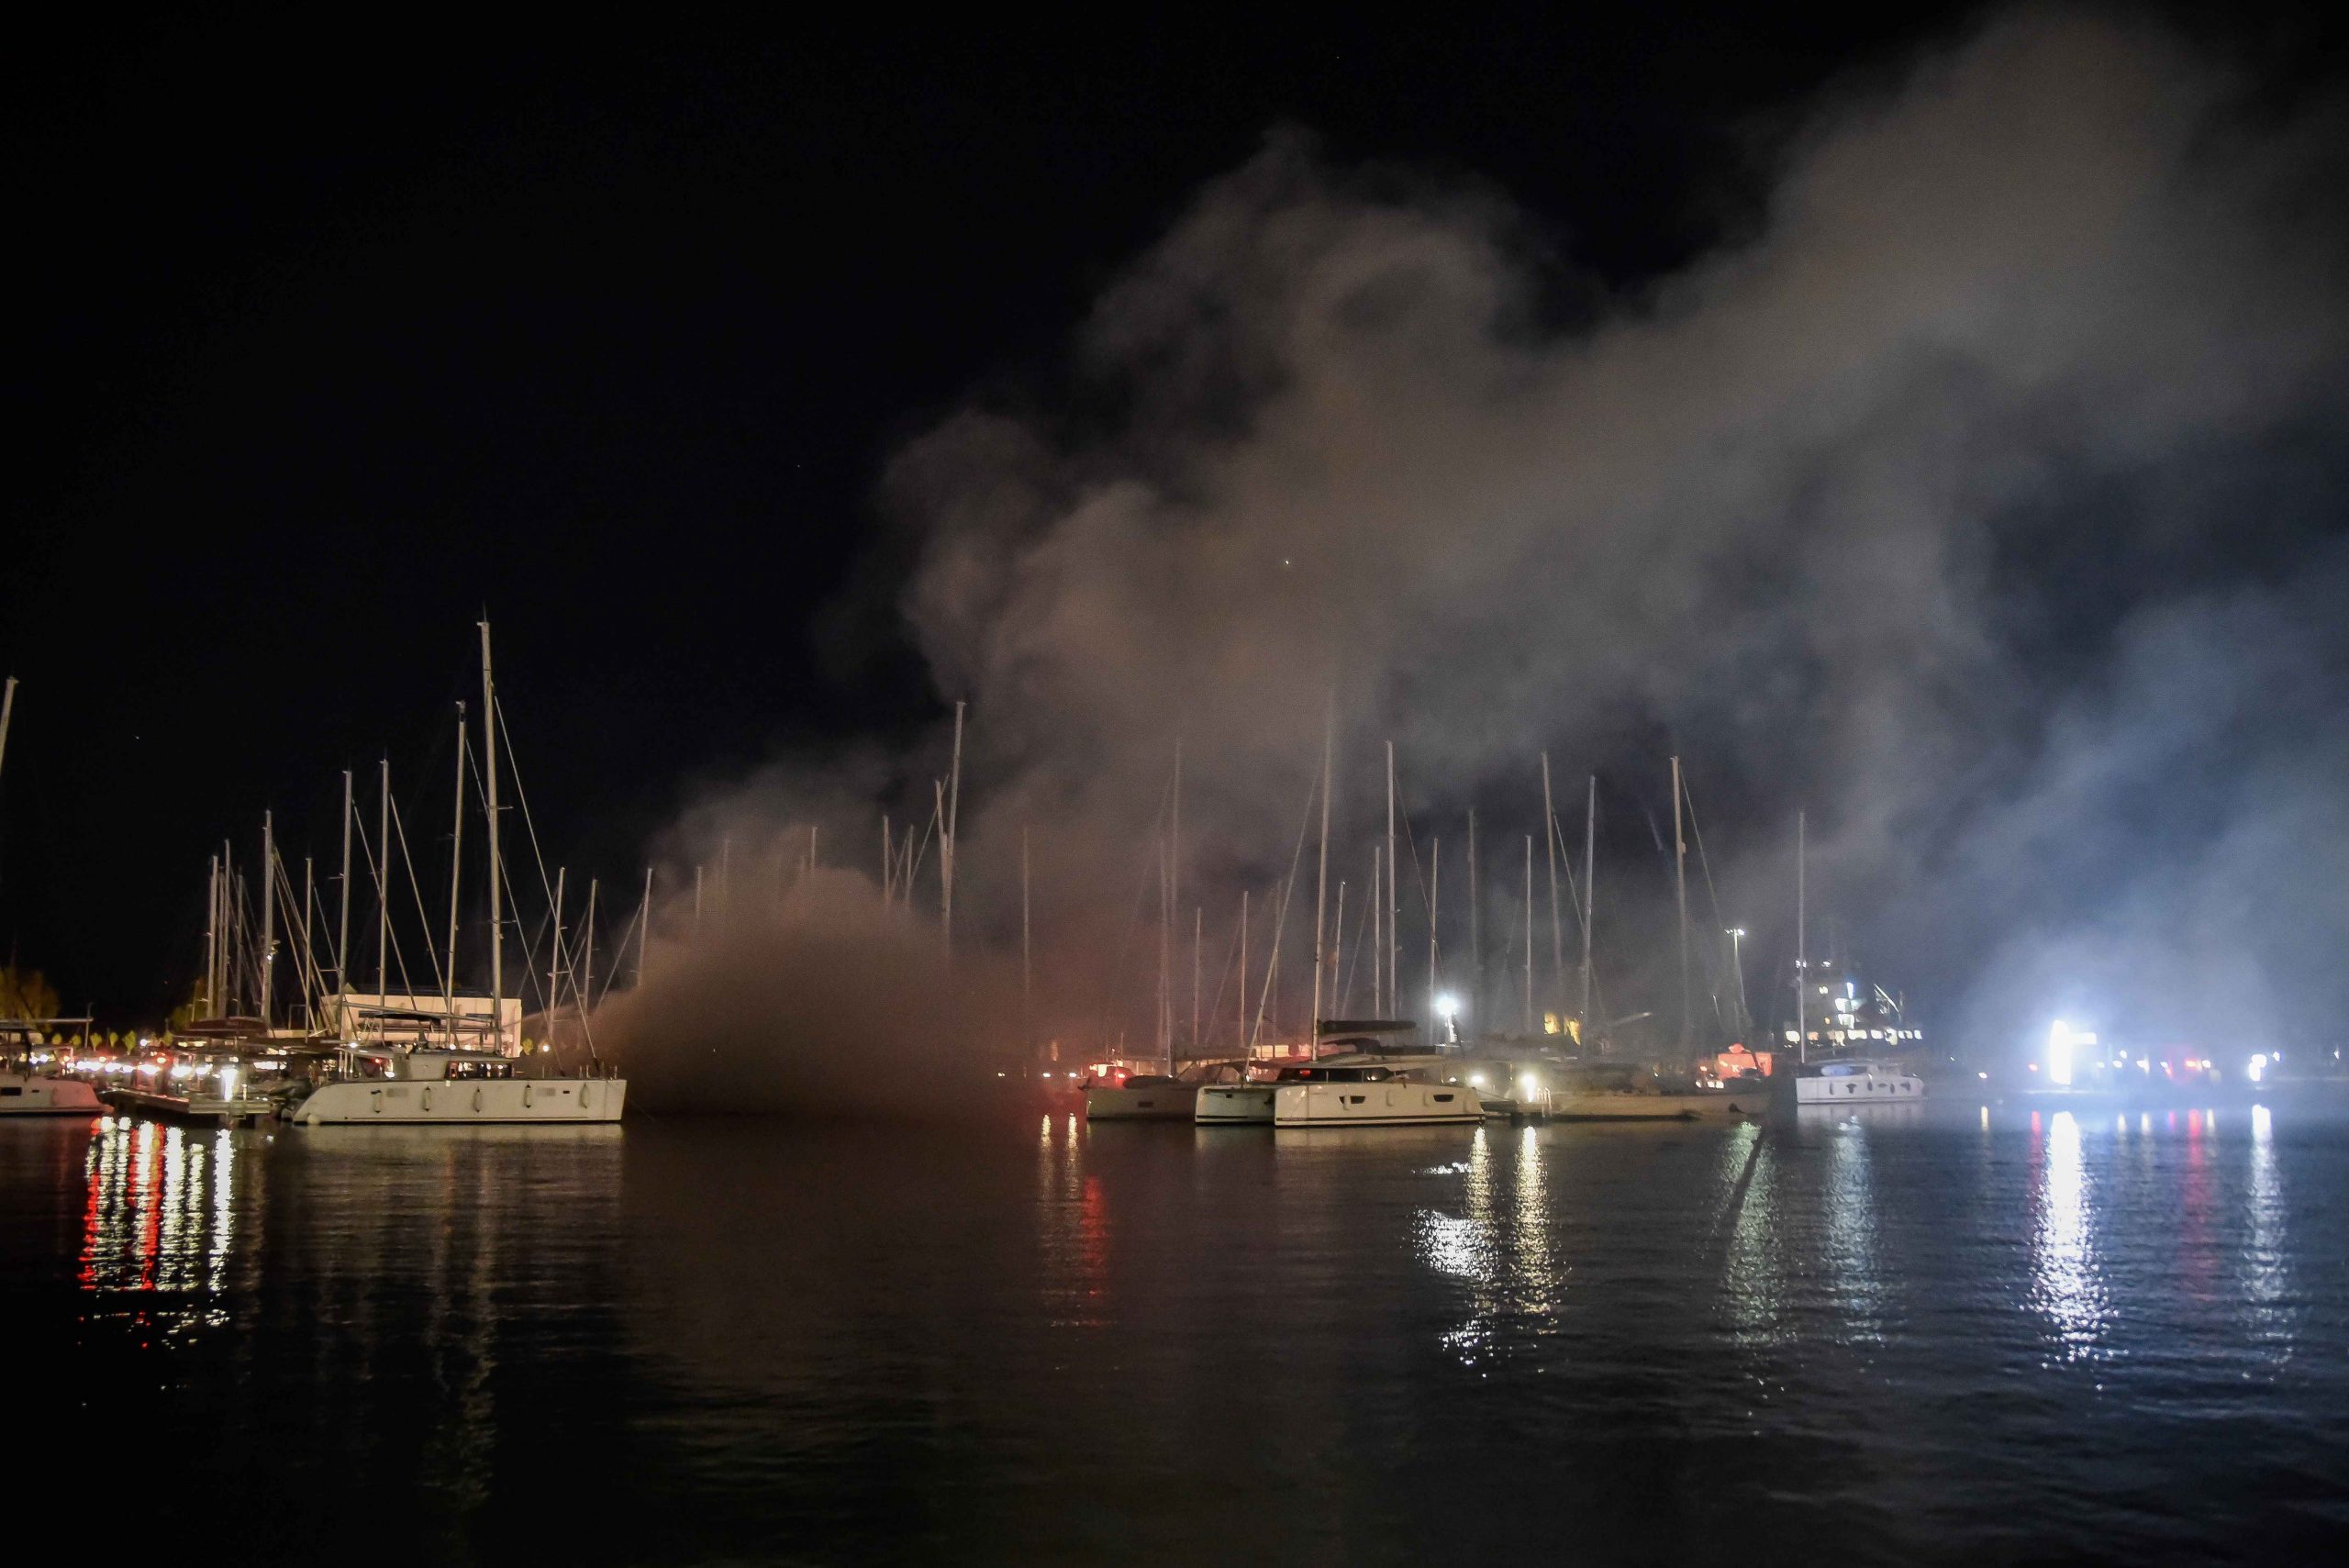 Thieves Target Southern Athens Marina 3 Days in a Row Looking for Flares